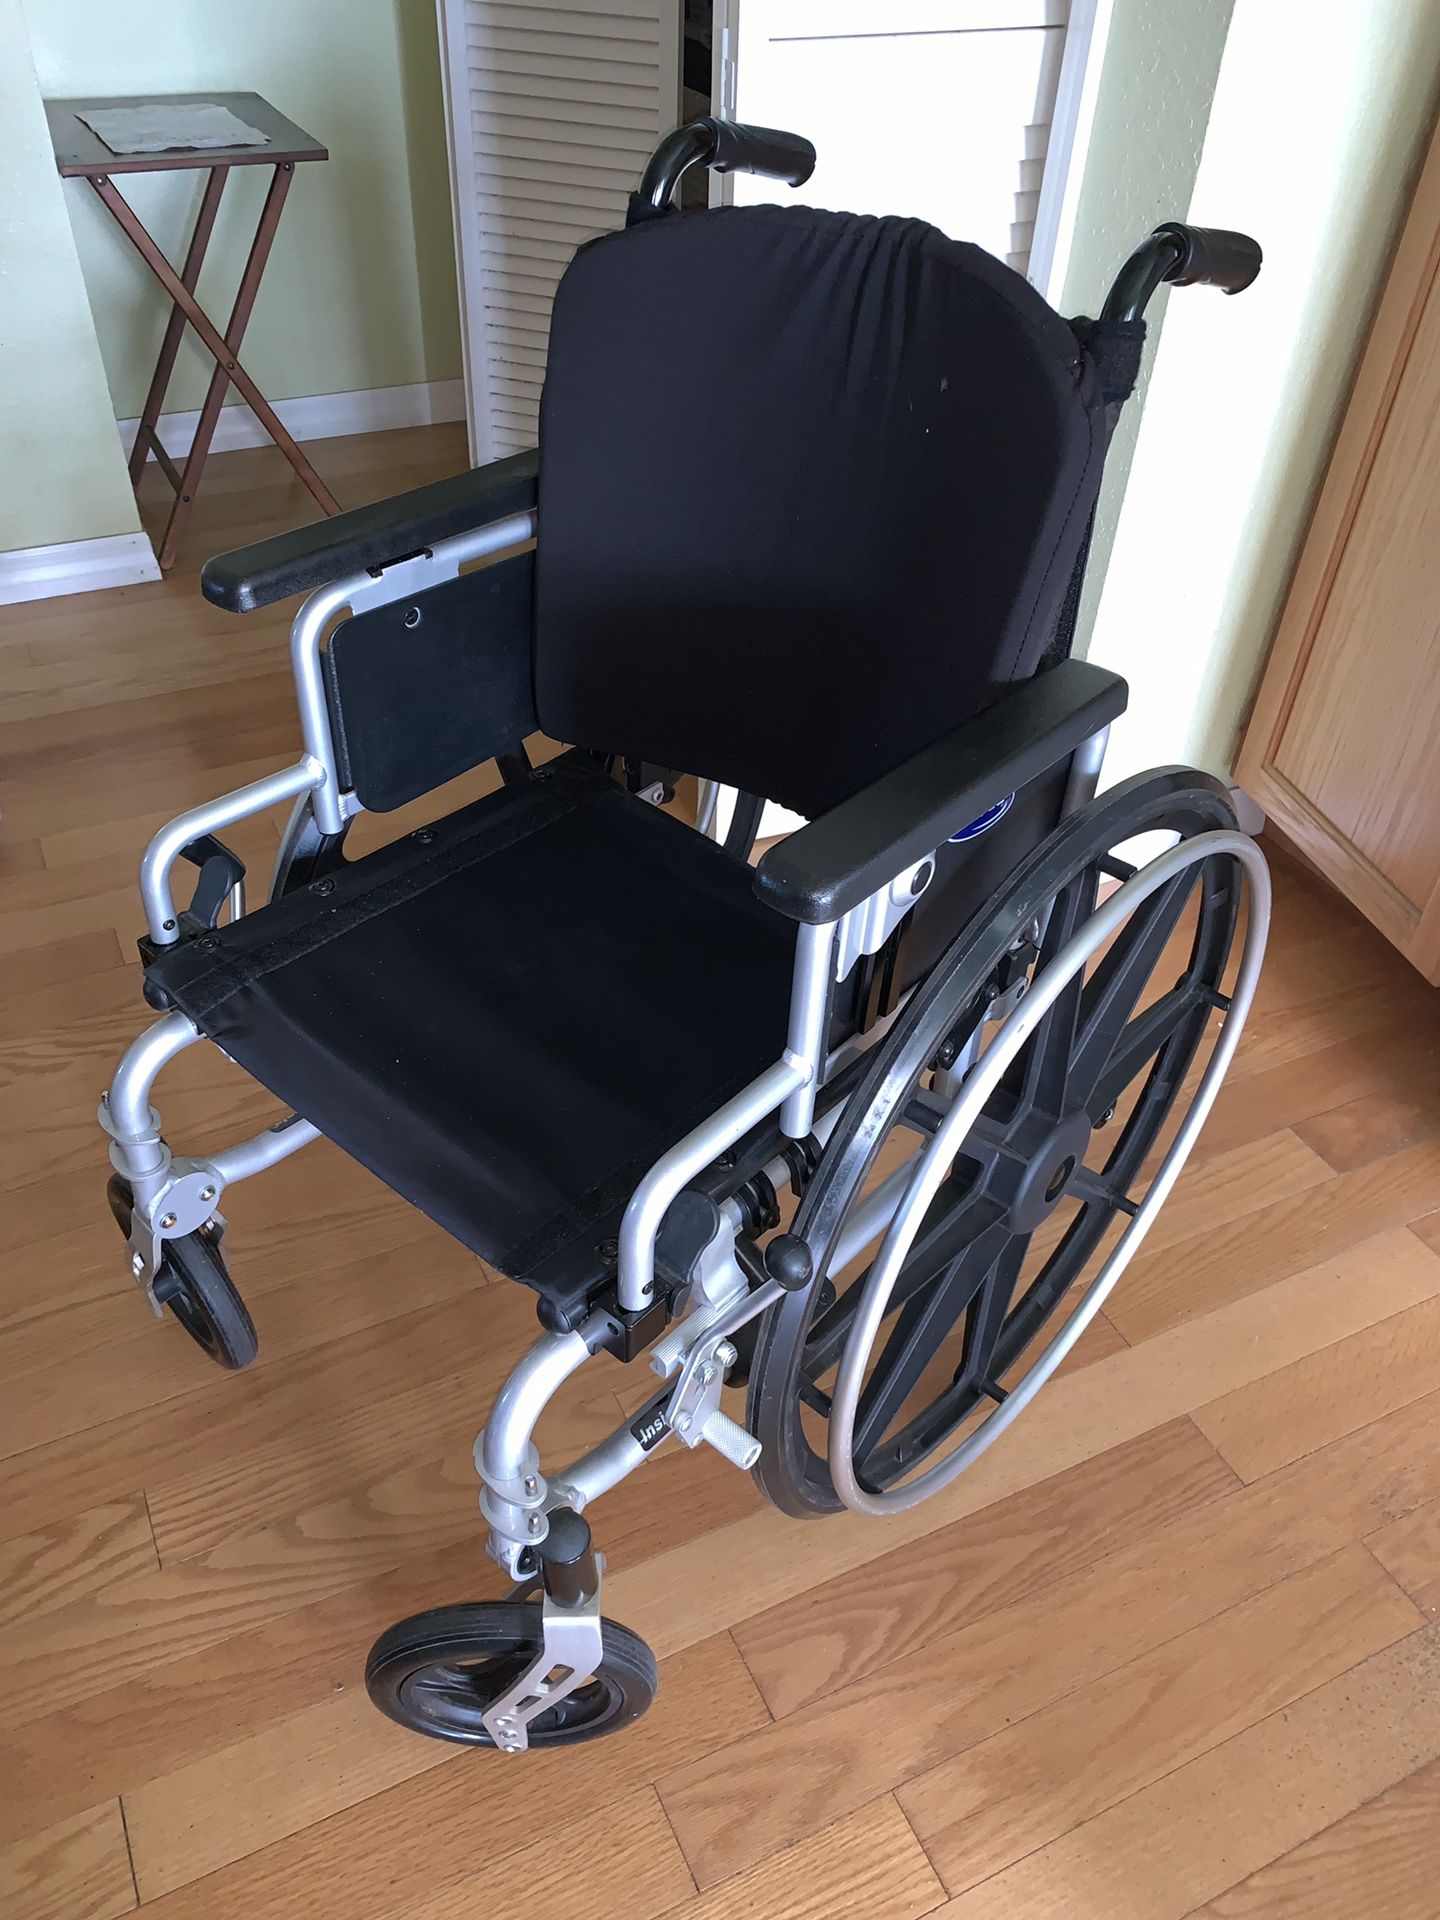 Wheel chair, excellent cond, sturdy, highly adjustable